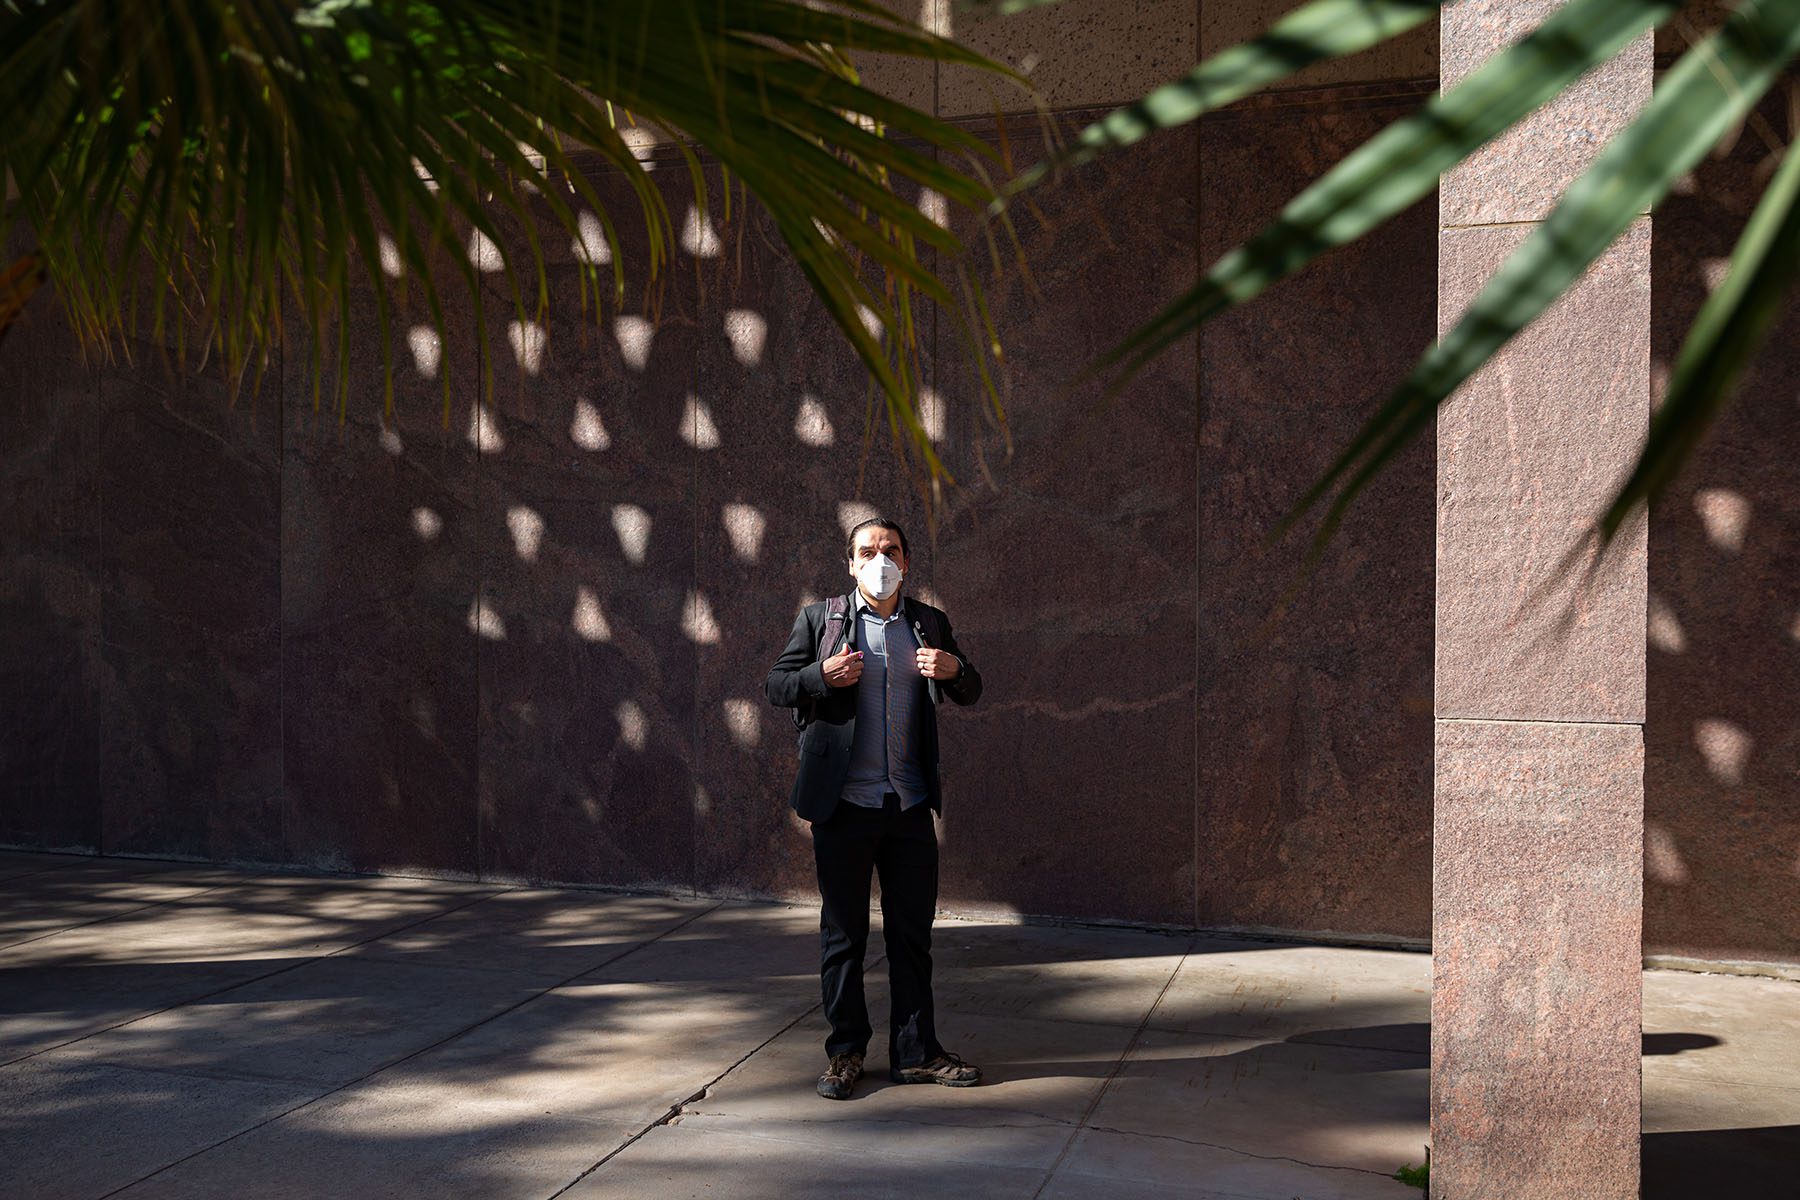 Sen. Mendez wears a mask as he poses for a portrait near the Arizona State Capitol.